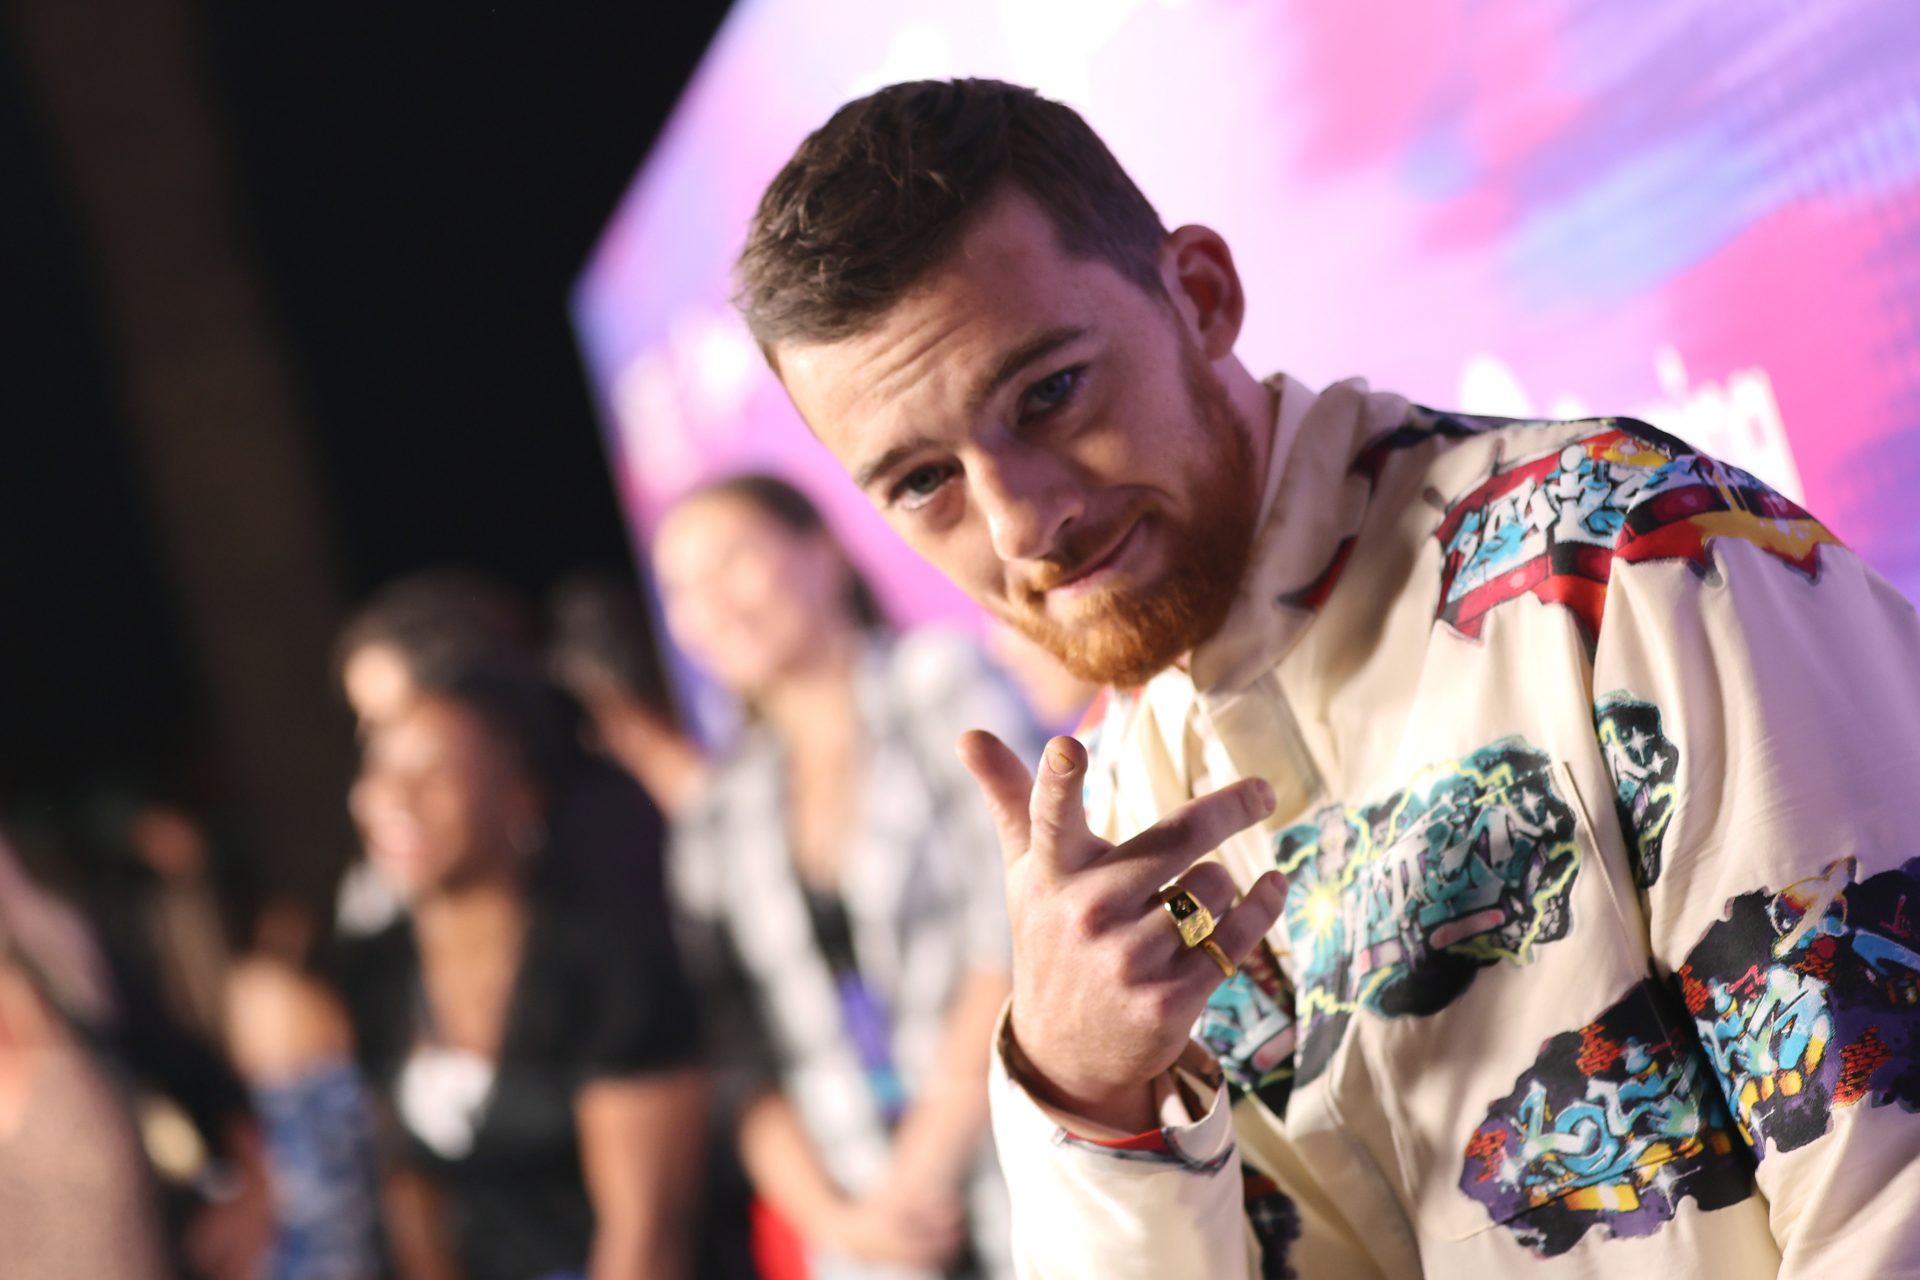 Zendaya: He could light up any room